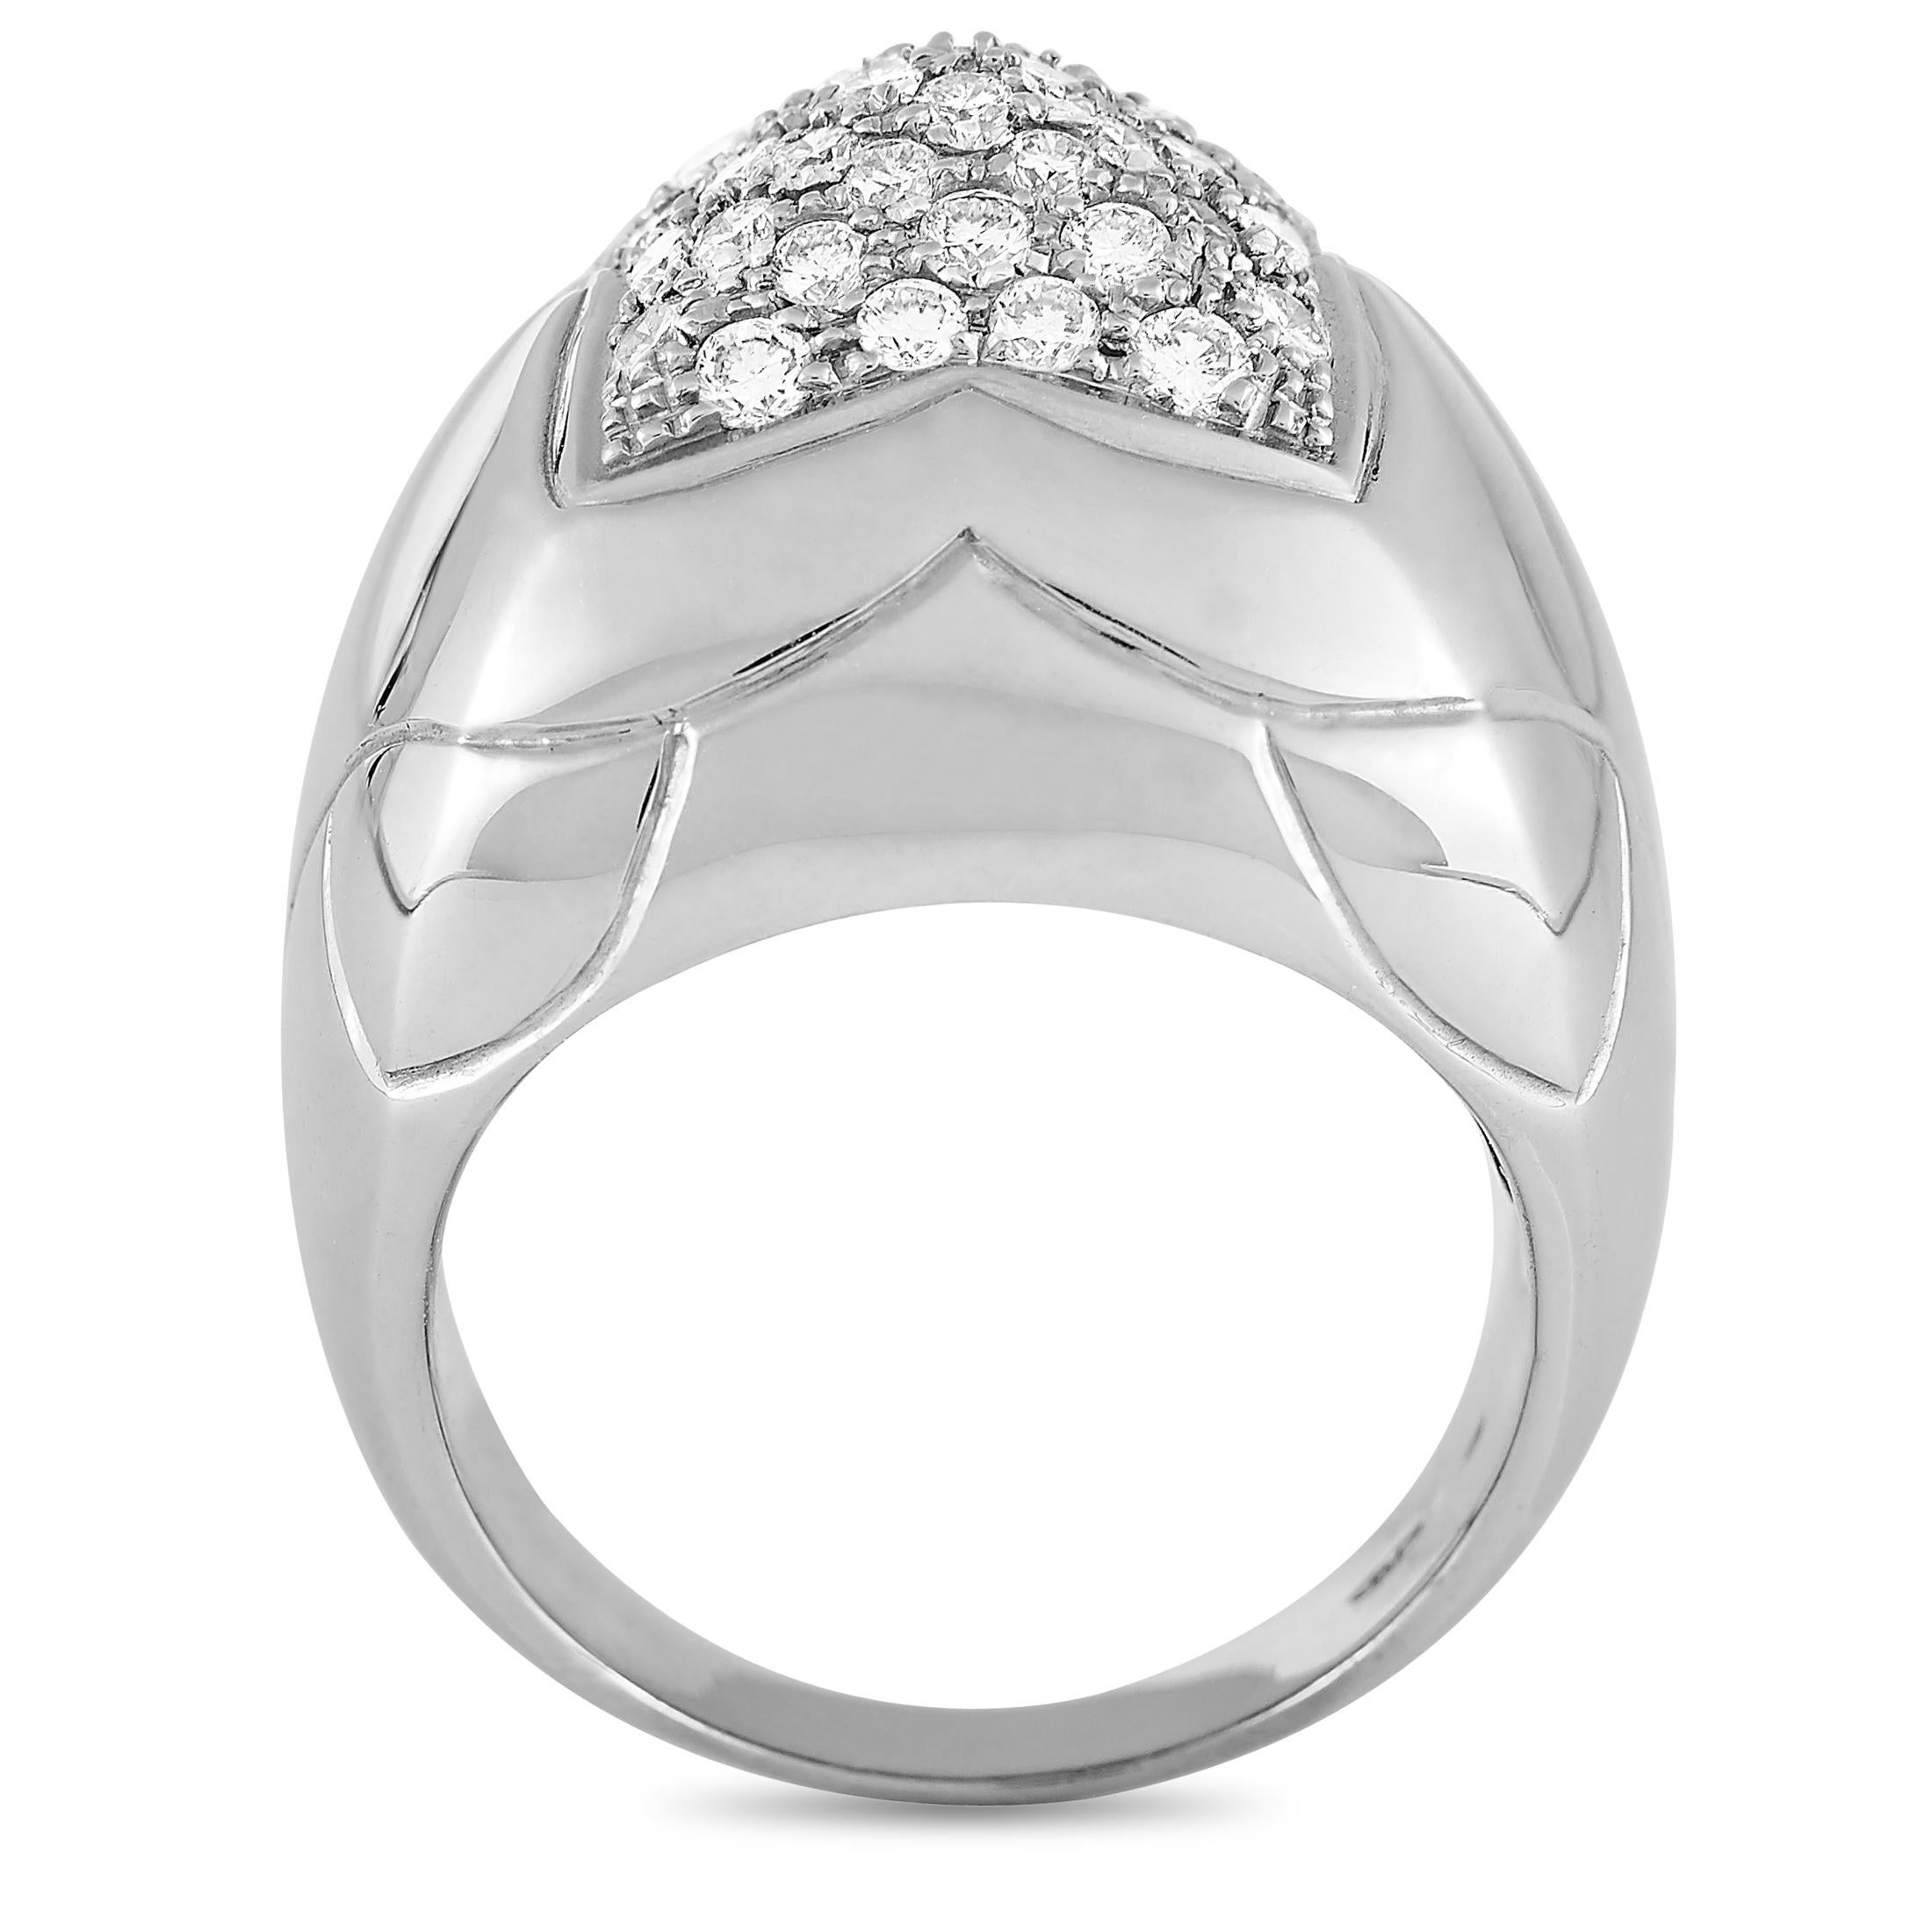 This Bvlgari ring is made of 18K white gold and weighs 15.5 grams, boasting band thickness of 4 mm and top height of 12 mm, while top dimensions measure 13 by 13 mm. The ring is embellished with diamond stones that feature F color and amount to 0.75